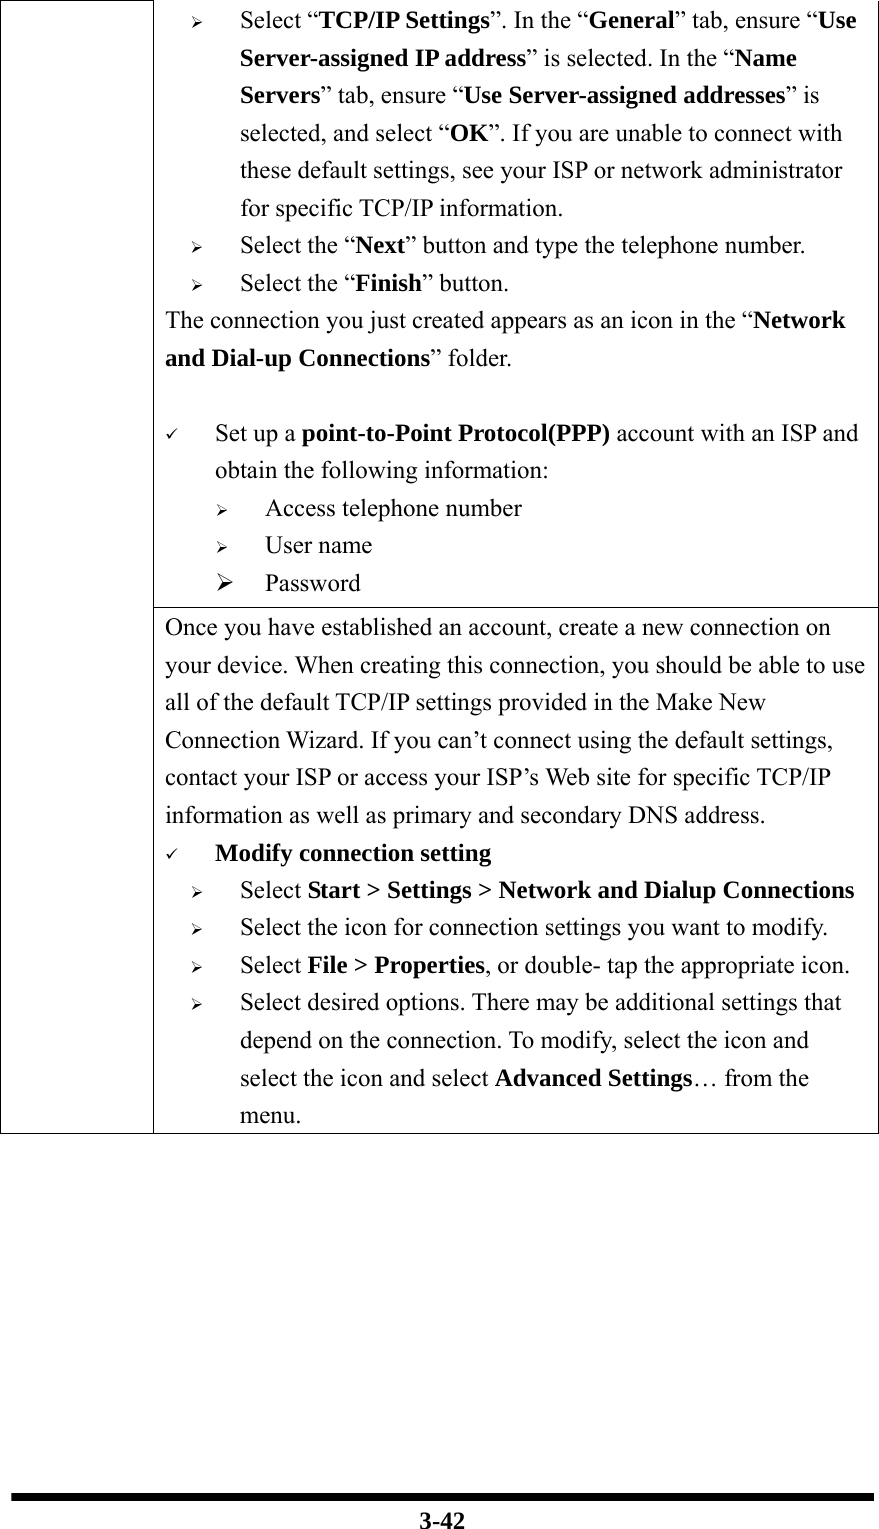  3-42 ¾ Select “TCP/IP Settings”. In the “General” tab, ensure “Use Server-assigned IP address” is selected. In the “Name Servers” tab, ensure “Use Server-assigned addresses” is selected, and select “OK”. If you are unable to connect with these default settings, see your ISP or network administrator for specific TCP/IP information. ¾ Select the “Next” button and type the telephone number. ¾ Select the “Finish” button. The connection you just created appears as an icon in the “Network and Dial-up Connections” folder.      9 Set up a point-to-Point Protocol(PPP) account with an ISP and obtain the following information: ¾ Access telephone number ¾ User name ¾ Password Once you have established an account, create a new connection on your device. When creating this connection, you should be able to use all of the default TCP/IP settings provided in the Make New Connection Wizard. If you can’t connect using the default settings, contact your ISP or access your ISP’s Web site for specific TCP/IP information as well as primary and secondary DNS address. 9 Modify connection setting ¾ Select Start &gt; Settings &gt; Network and Dialup Connections ¾ Select the icon for connection settings you want to modify. ¾ Select File &gt; Properties, or double- tap the appropriate icon. ¾ Select desired options. There may be additional settings that depend on the connection. To modify, select the icon and select the icon and select Advanced Settings… from the menu.  